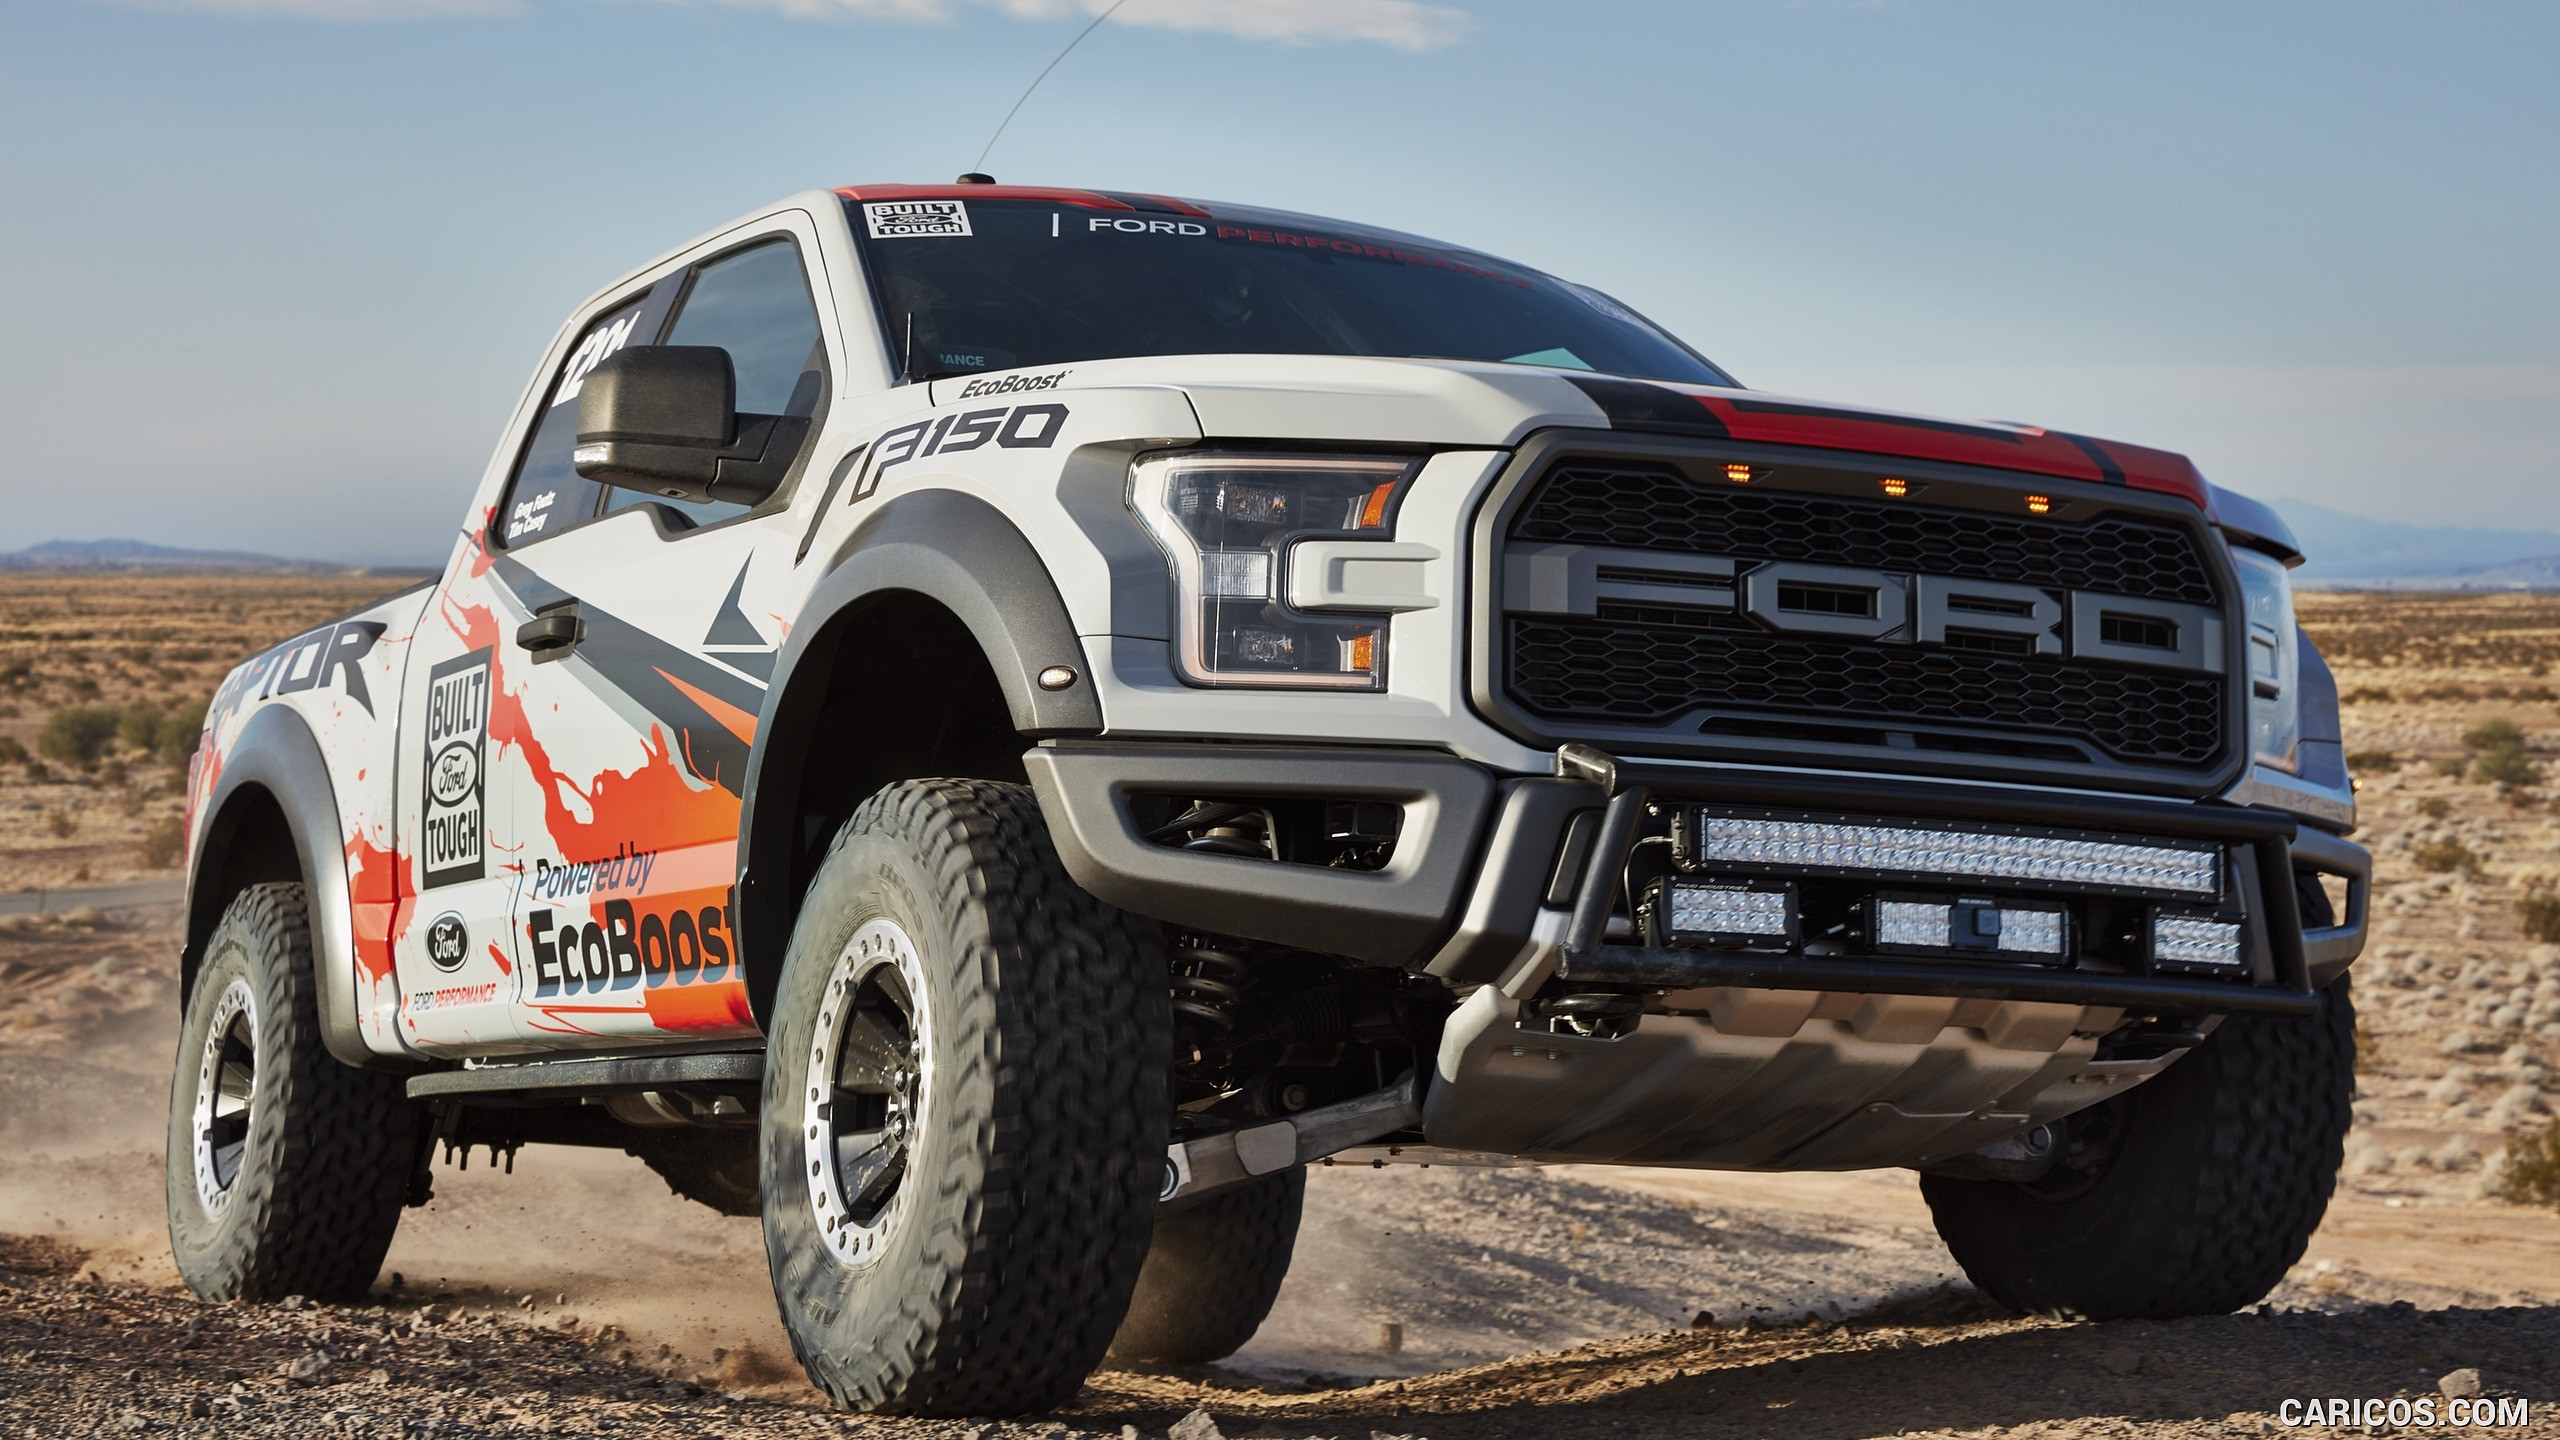 2560x1440 The 2017 Ford Raptor is going racing, and it's about time. Ford's  rip-roaring off-roader will join the “Best in the Desert” race series.